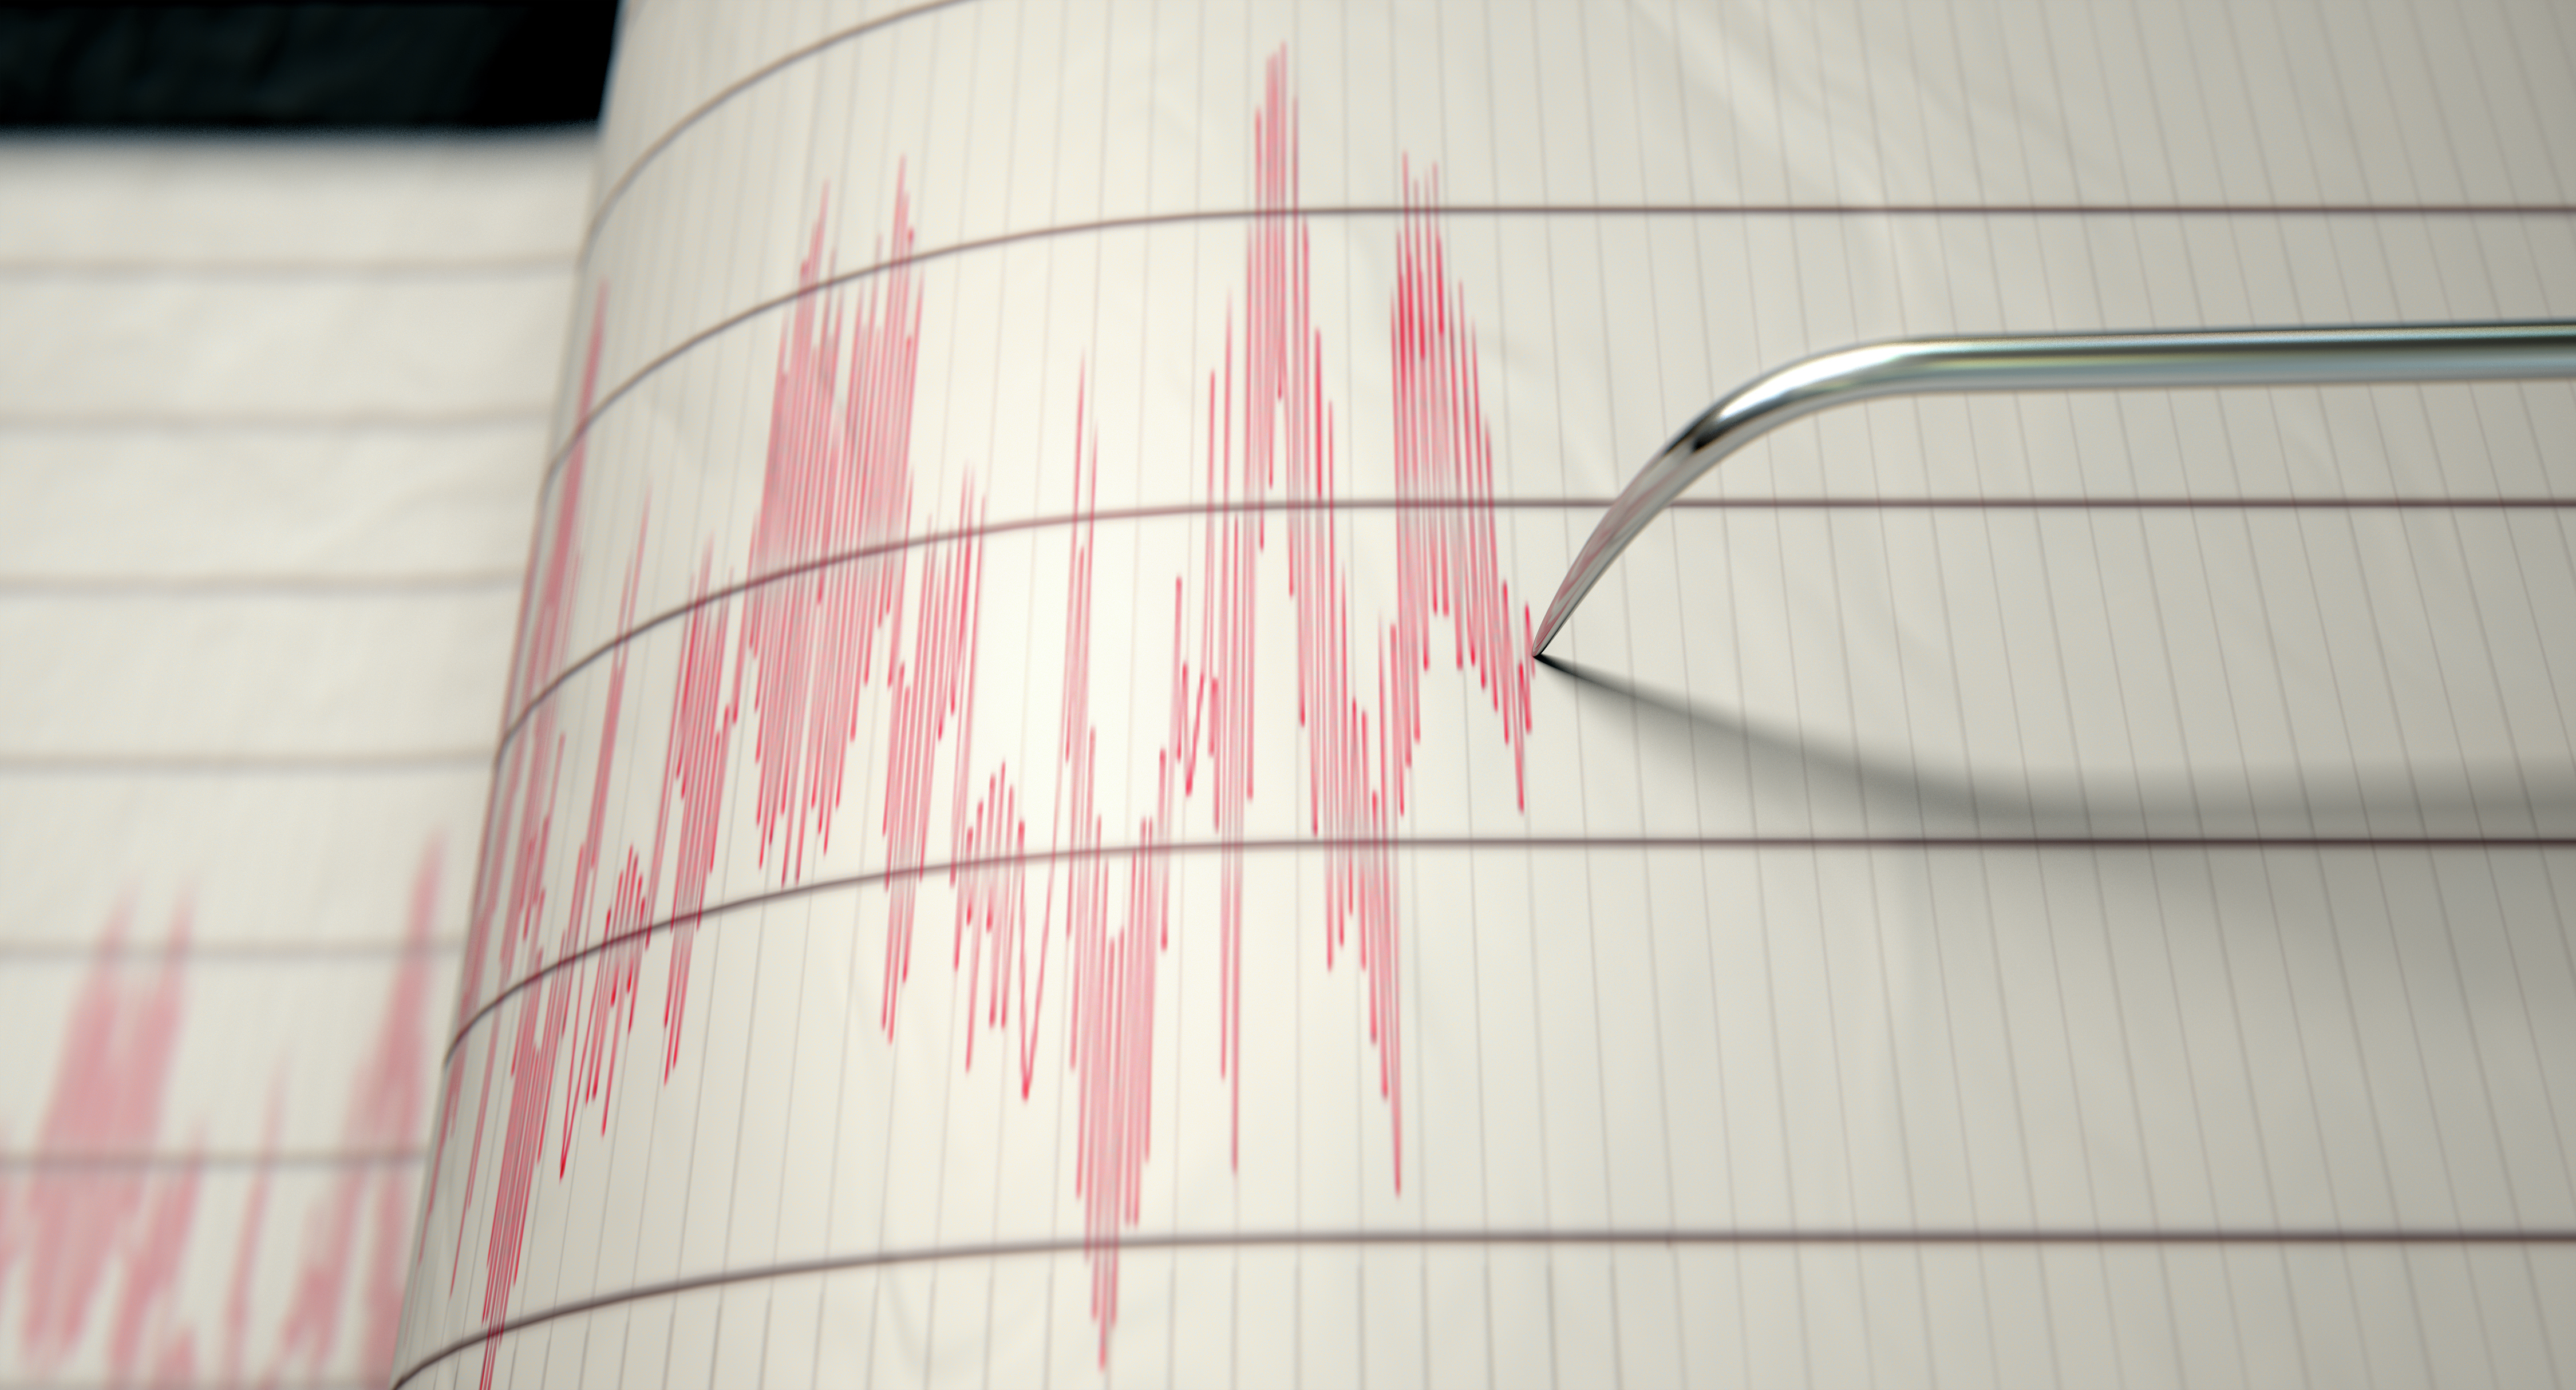 Prepare for more aftershocks from Barstow quake, seismologist says